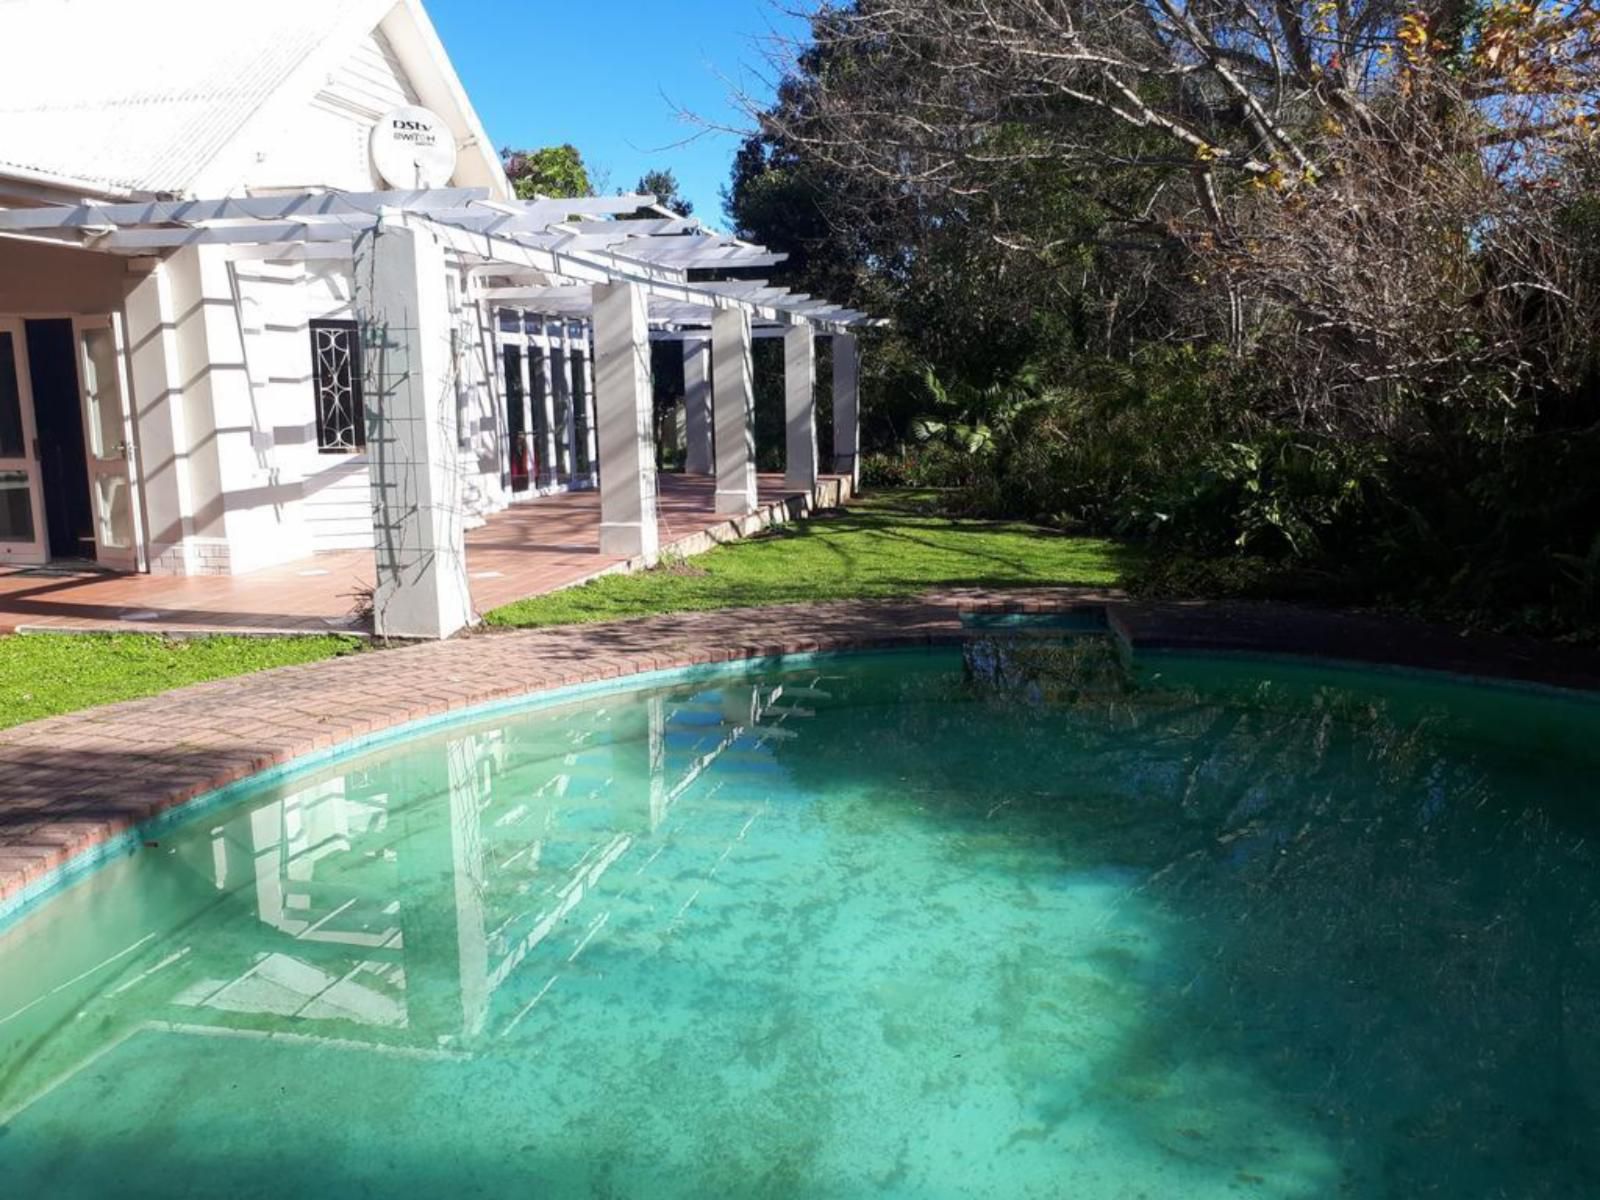 Sarah S Place Heatherlands George Western Cape South Africa House, Building, Architecture, Palm Tree, Plant, Nature, Wood, Garden, Swimming Pool